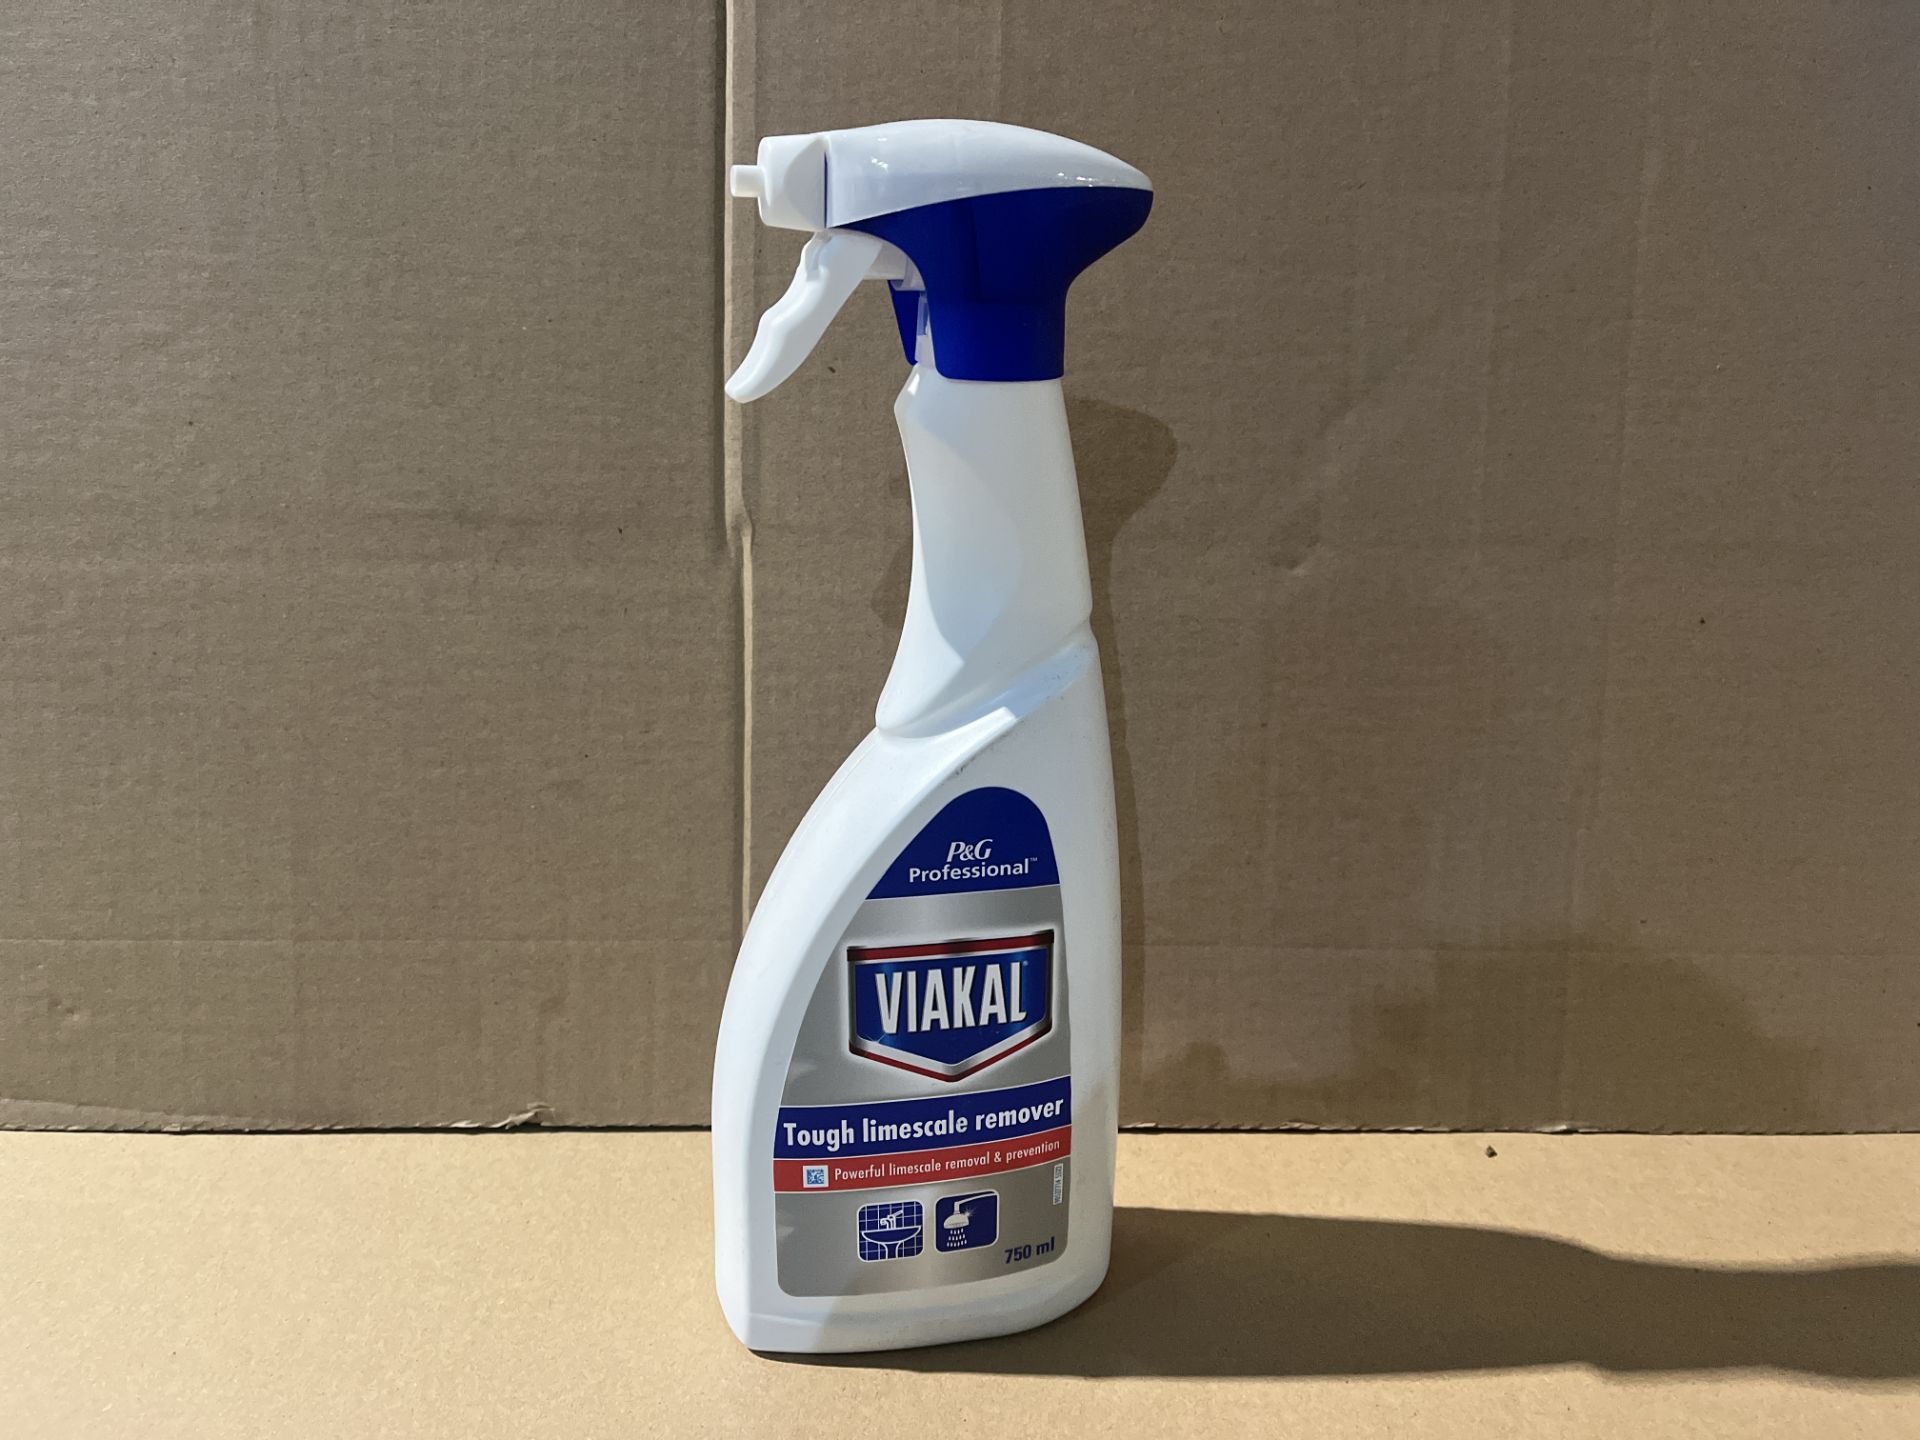 40 X BRAND NEW P AND G PROFESSIONAL VIAKAL TOUGH LIMESCALE REMOVER 750ML R15-4